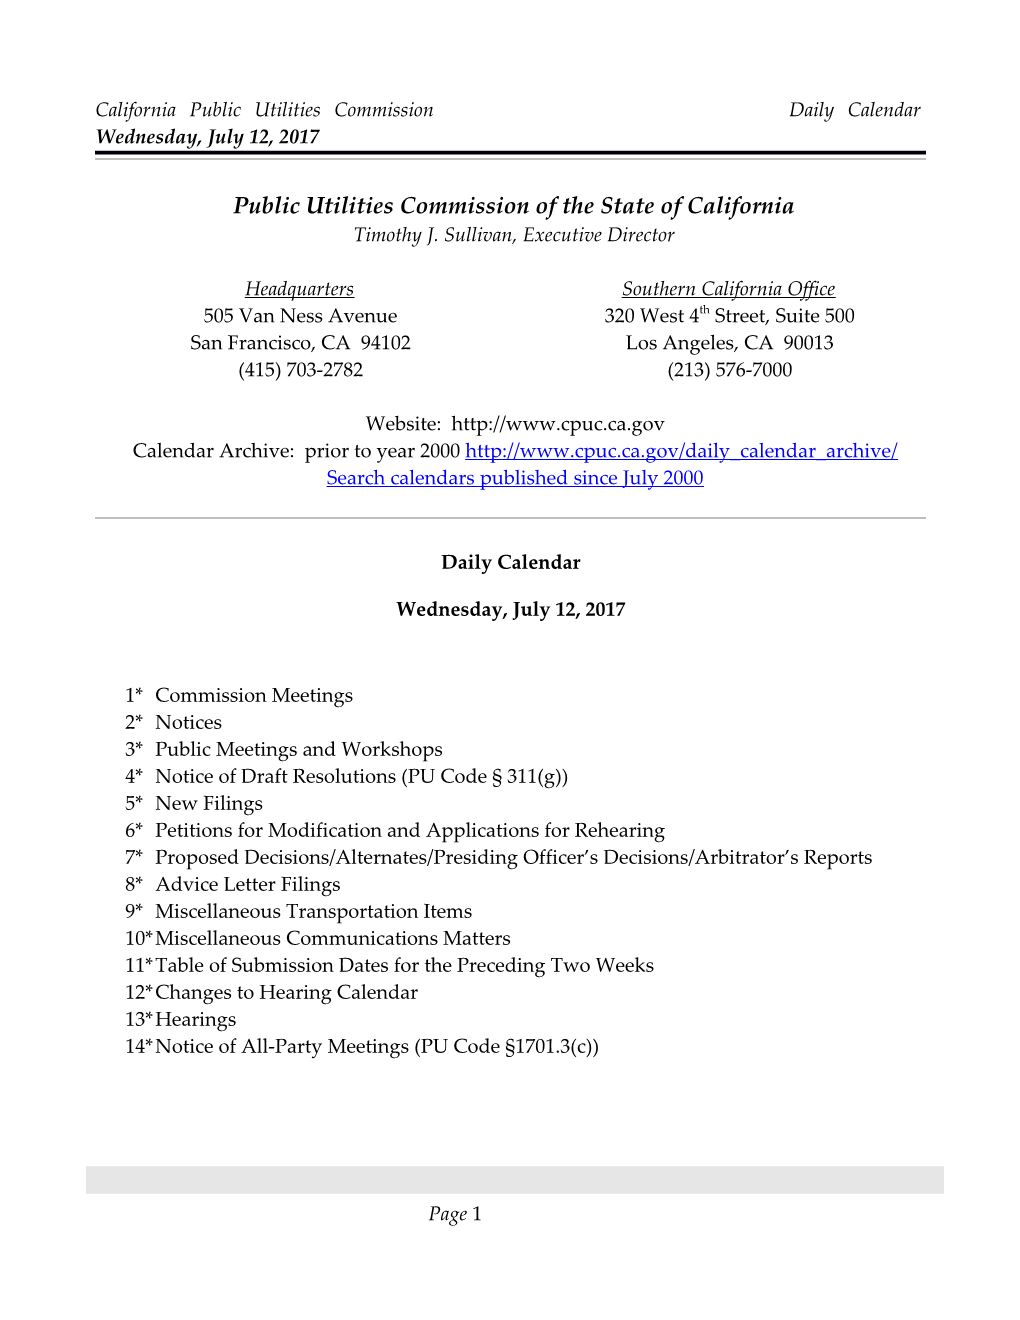 California Public Utilities Commission Daily Calendar Wednesday, July 12, 2017